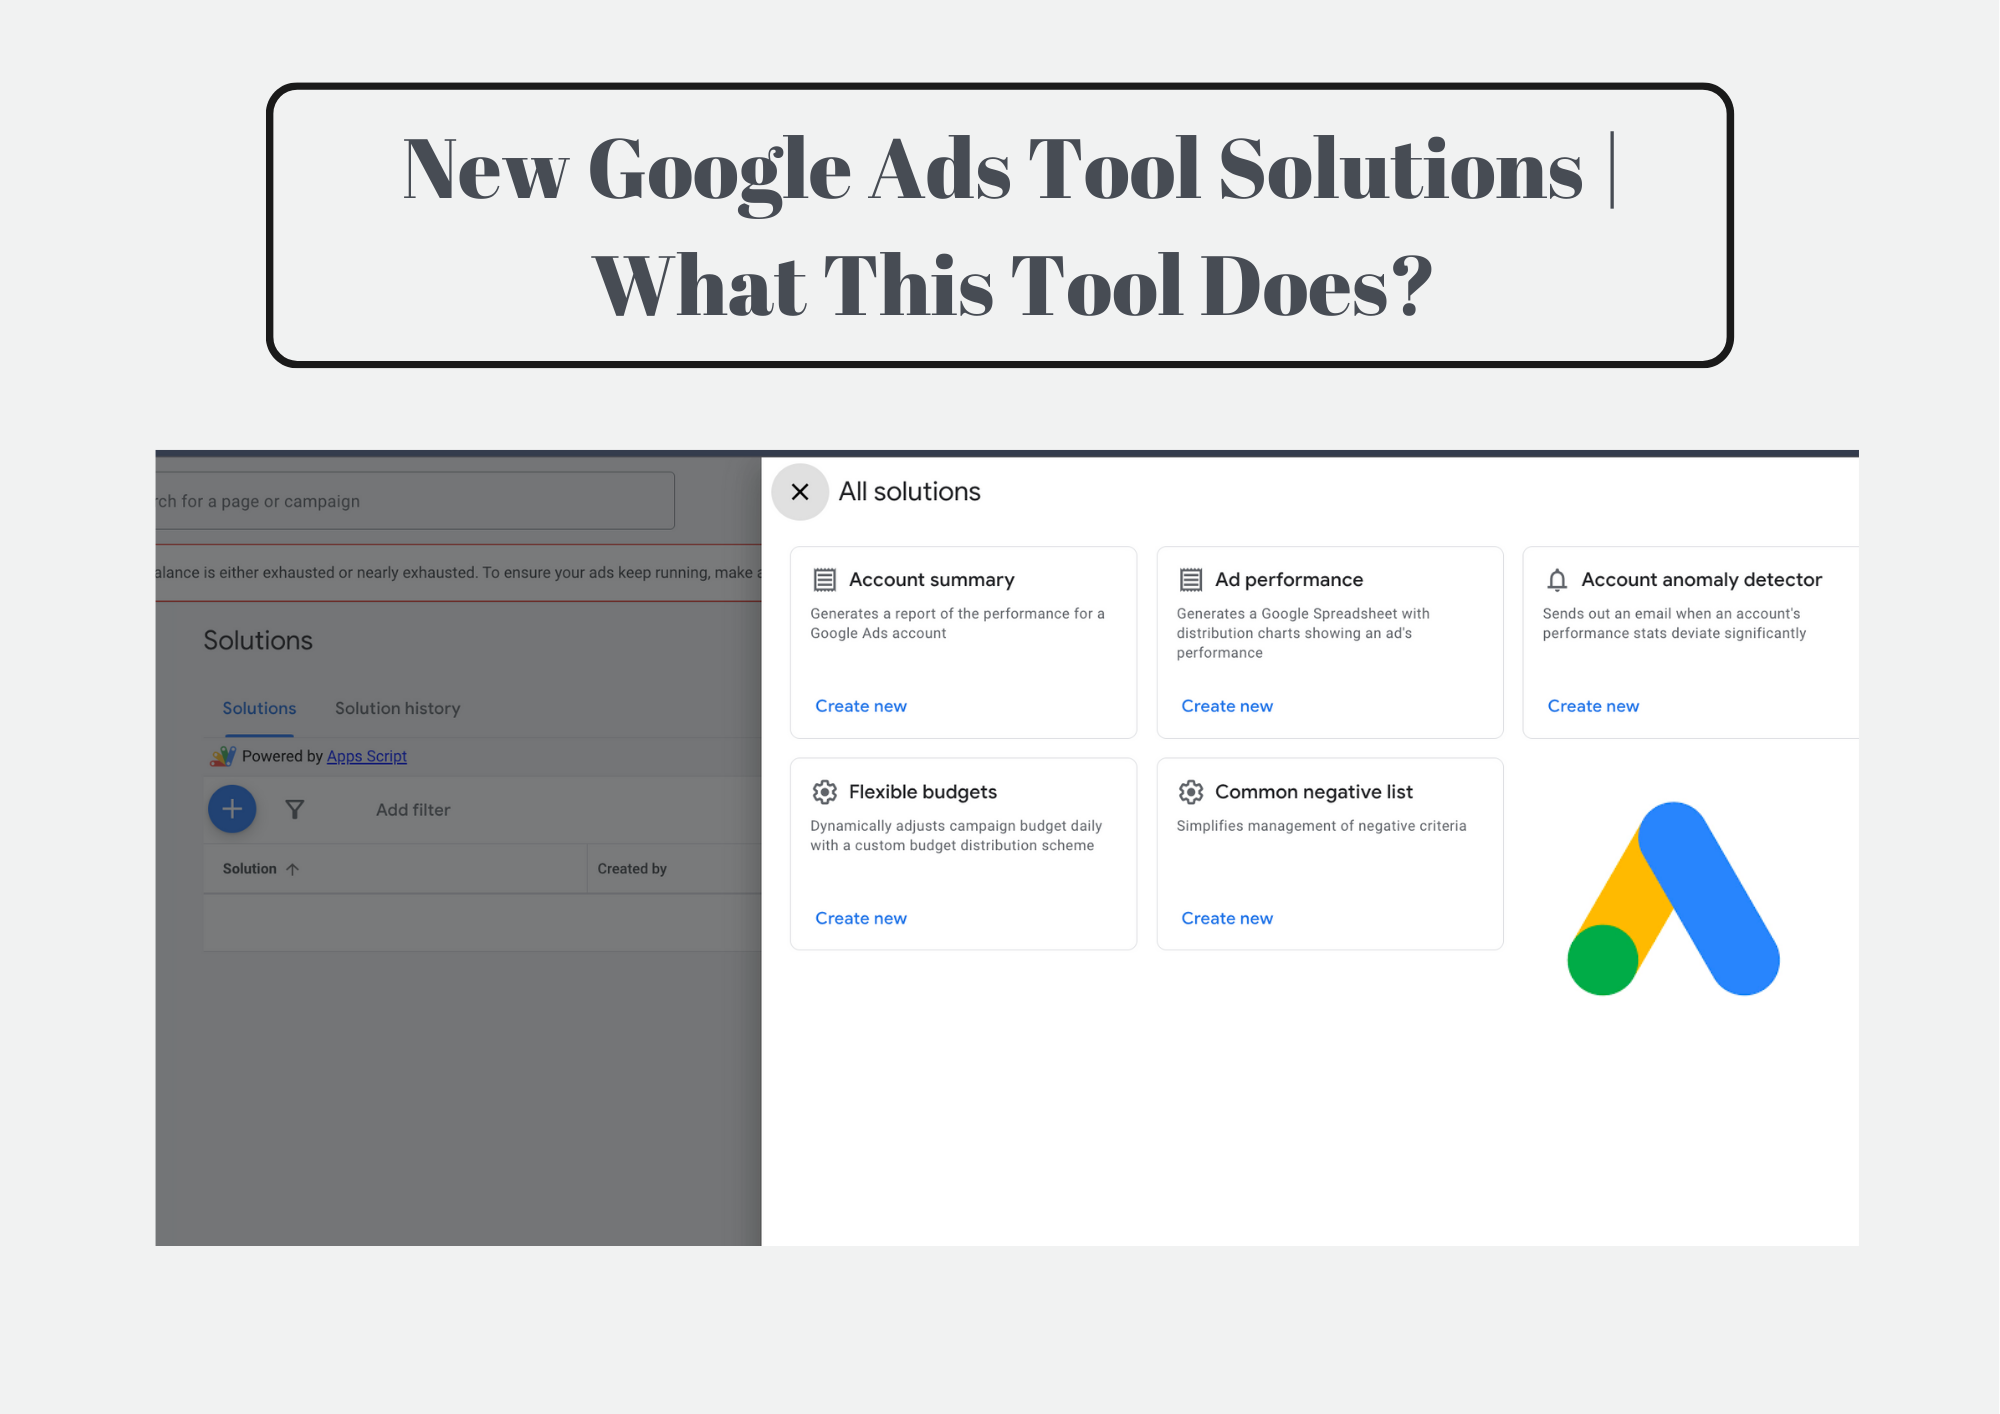 New Google Ads Tool Solutions What This Tool Does